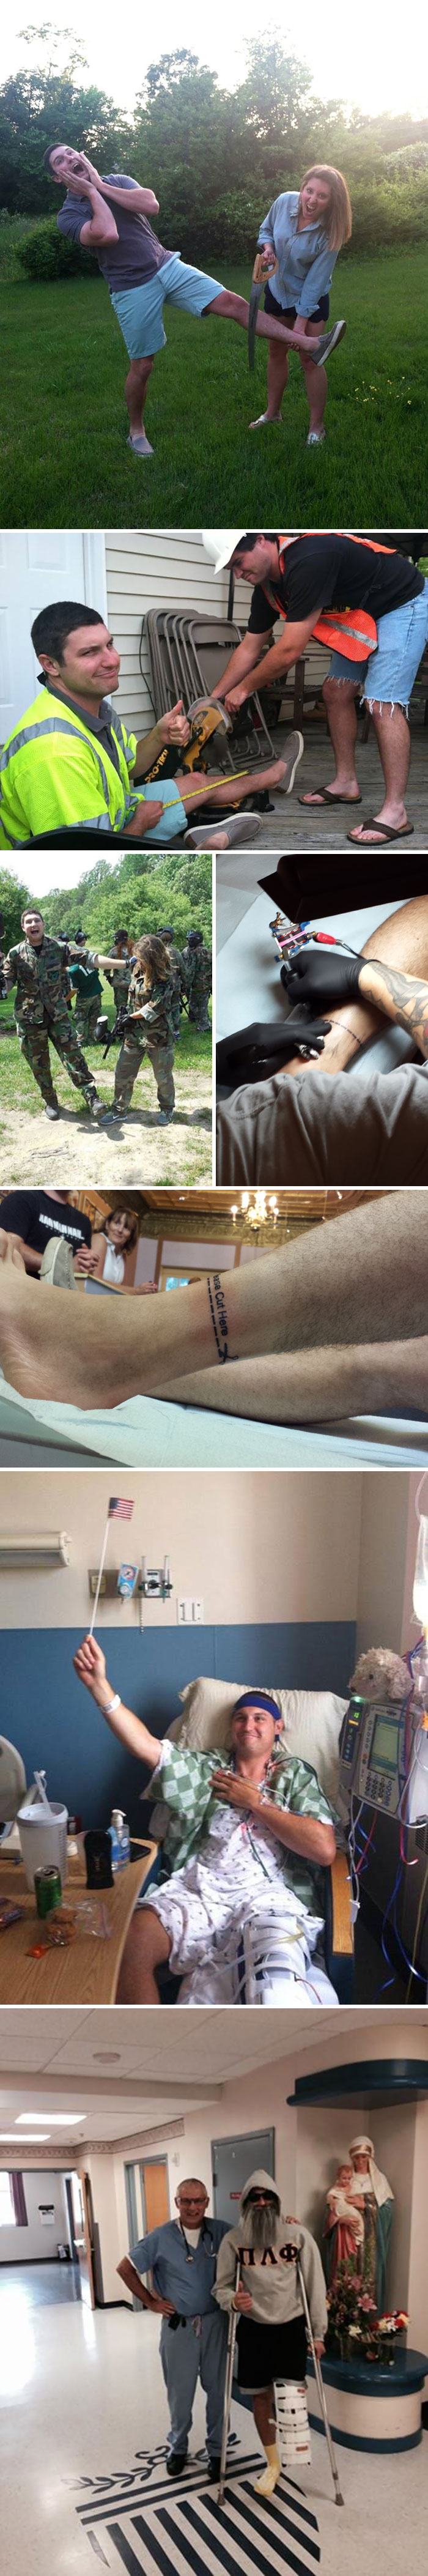 My Brother Opted To Get A Below-The-Knee Amputation Two Weeks Ago. So He Started Taking Pictures Of How We Could Do The Surgery Ourselves, Then Got A Permanent/Non-Permanent Tattoo To Help Out The Med-Students, And Finally, Goofed Off At The Hospital Afterwards. He Is My Inspiration